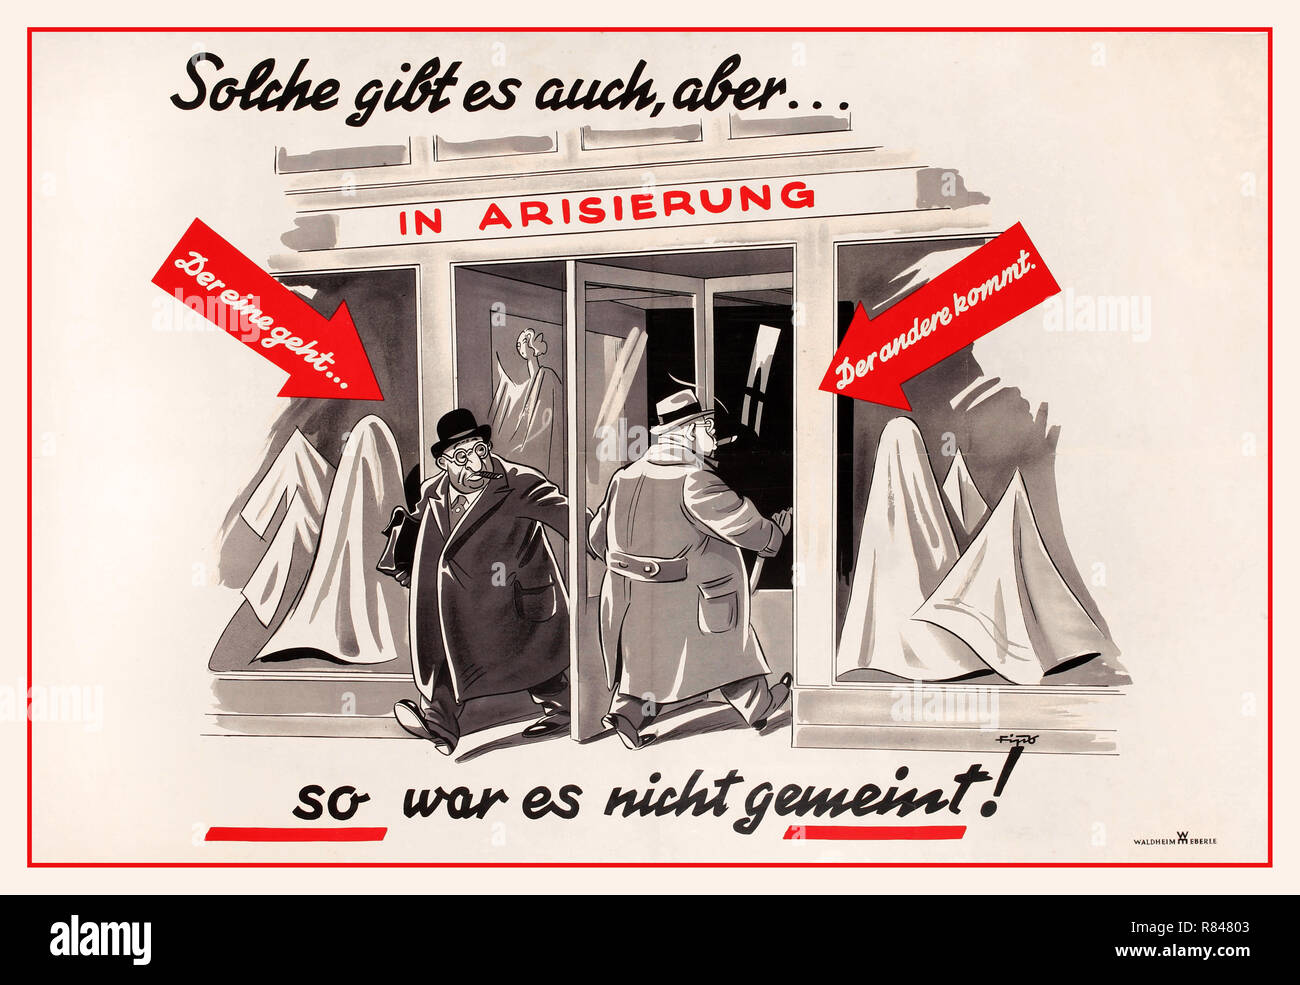 Vintage 1930’s Nazi Germany NSDAP Antisemitic propaganda poster “You Have People Who Do This to You, Too...But It Wasn't Meant to Be That Way” (Solche Gibt es auch, aber...So war es nicht gemeint!). Caricatured image of a German businessman entering the revolving door of a garment goods store. This entrance is marked with the label: [As This One Enters] and the exit, where a caricatured businessman leaves, is marked: [The Other One Gets Out.] Issued by the NSDAP. Nazi Germany 1930’s propaganda Stock Photo